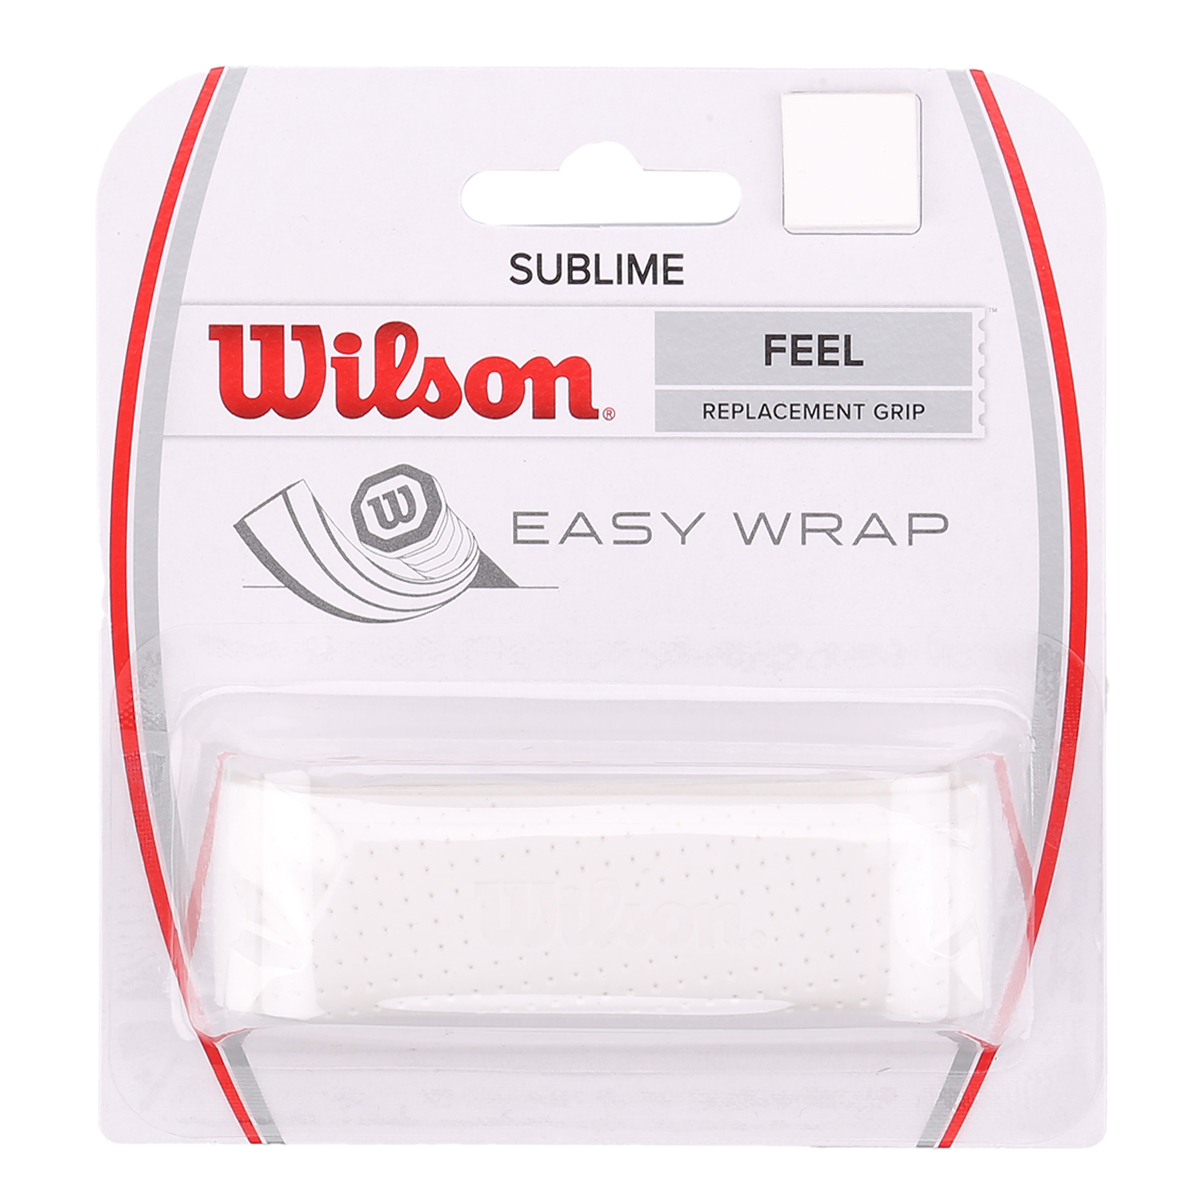 Cubre Grip Wilson Sublime,  image number null